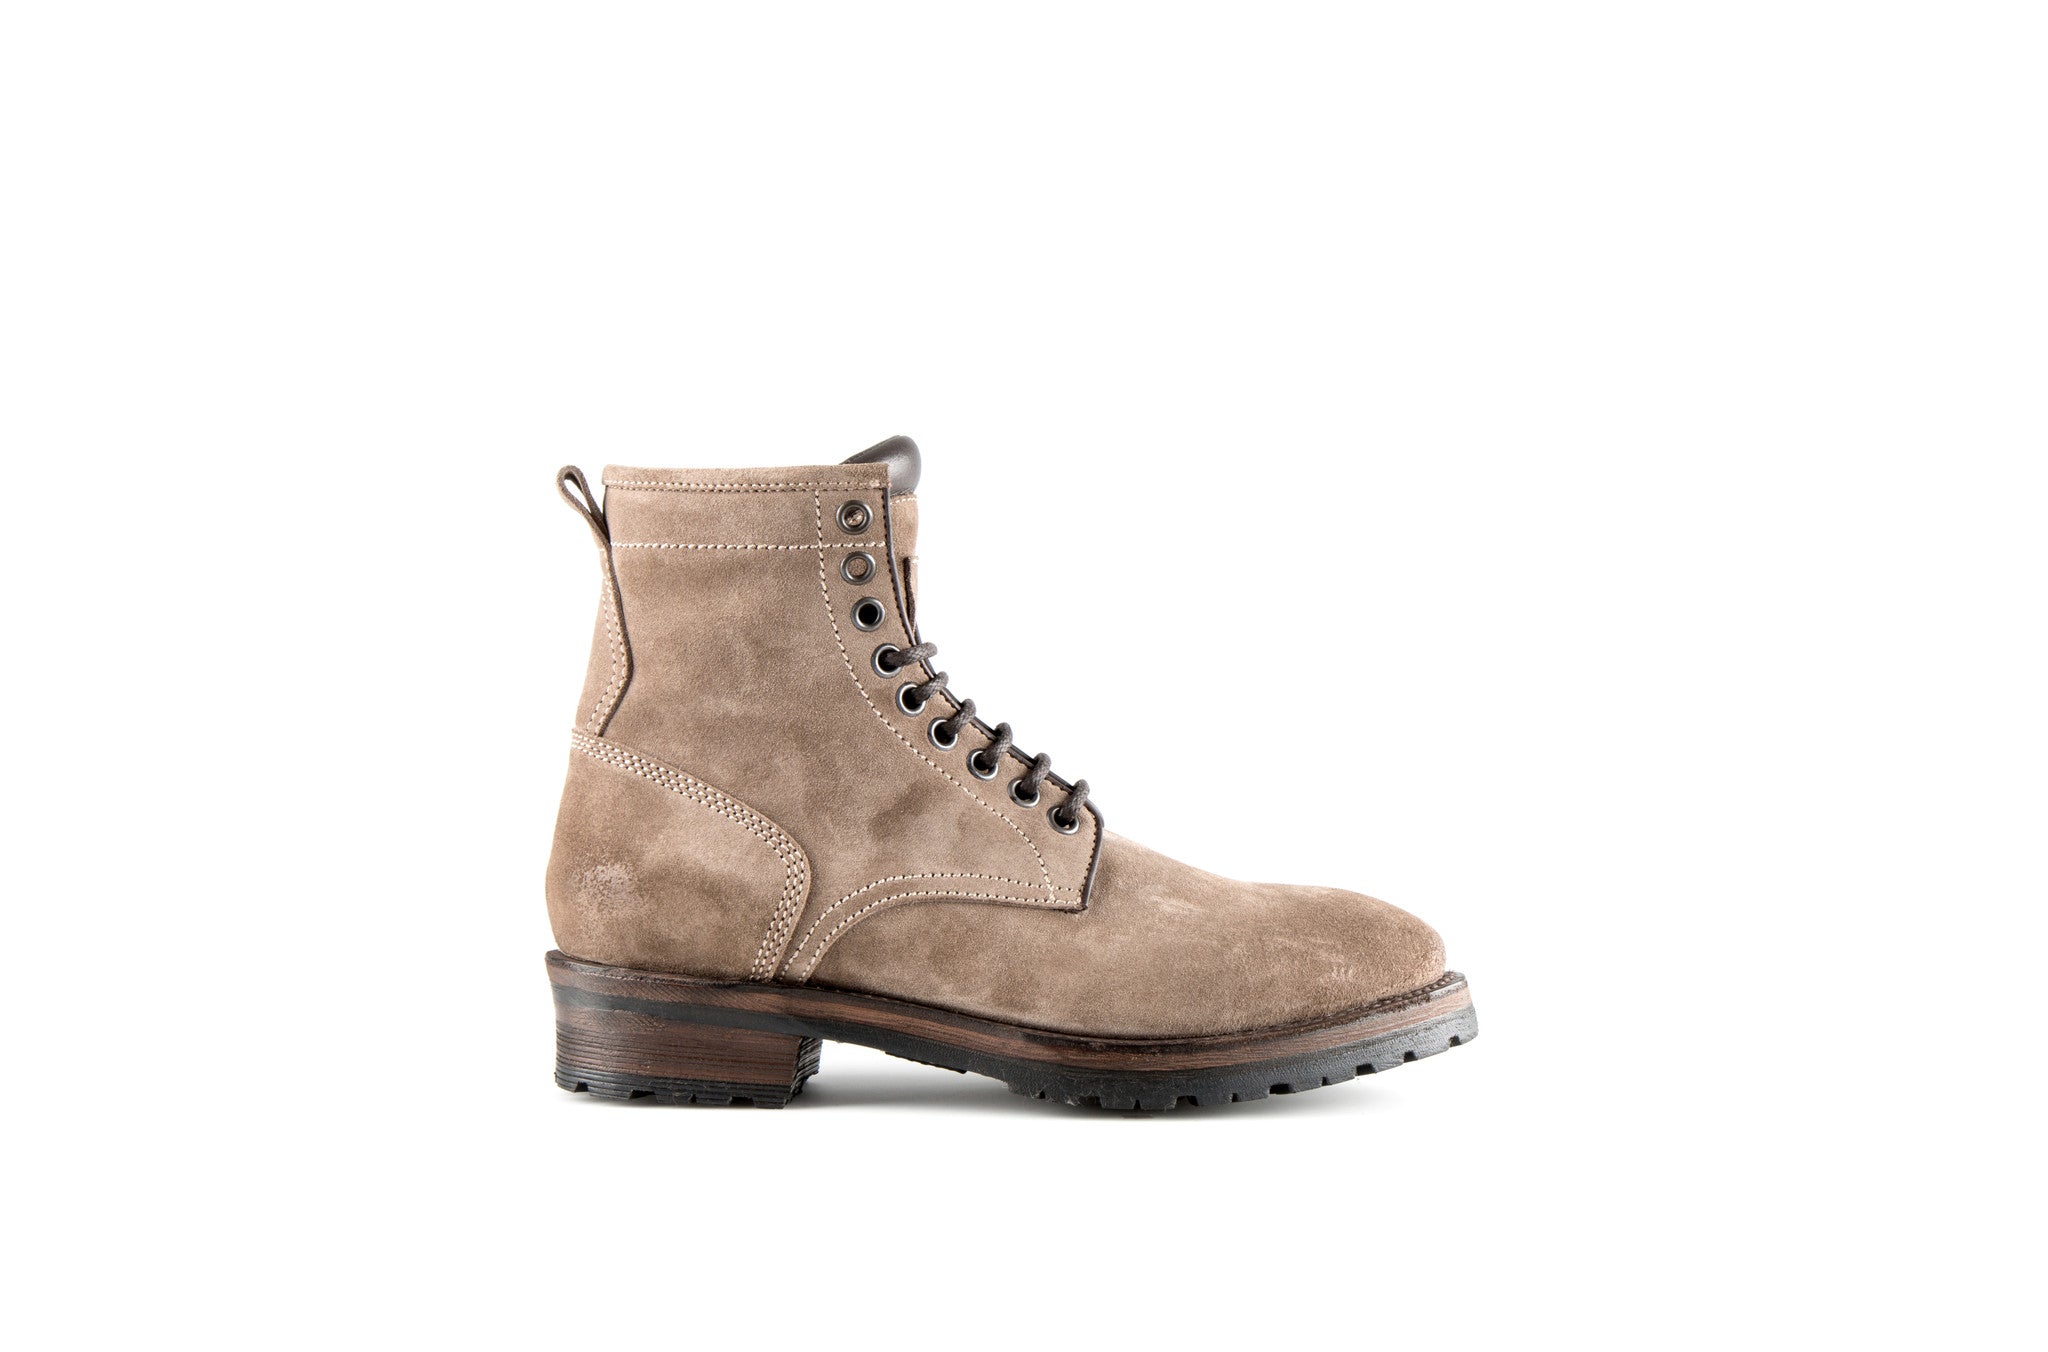 Royal Sand Suede Leather Logger Boots